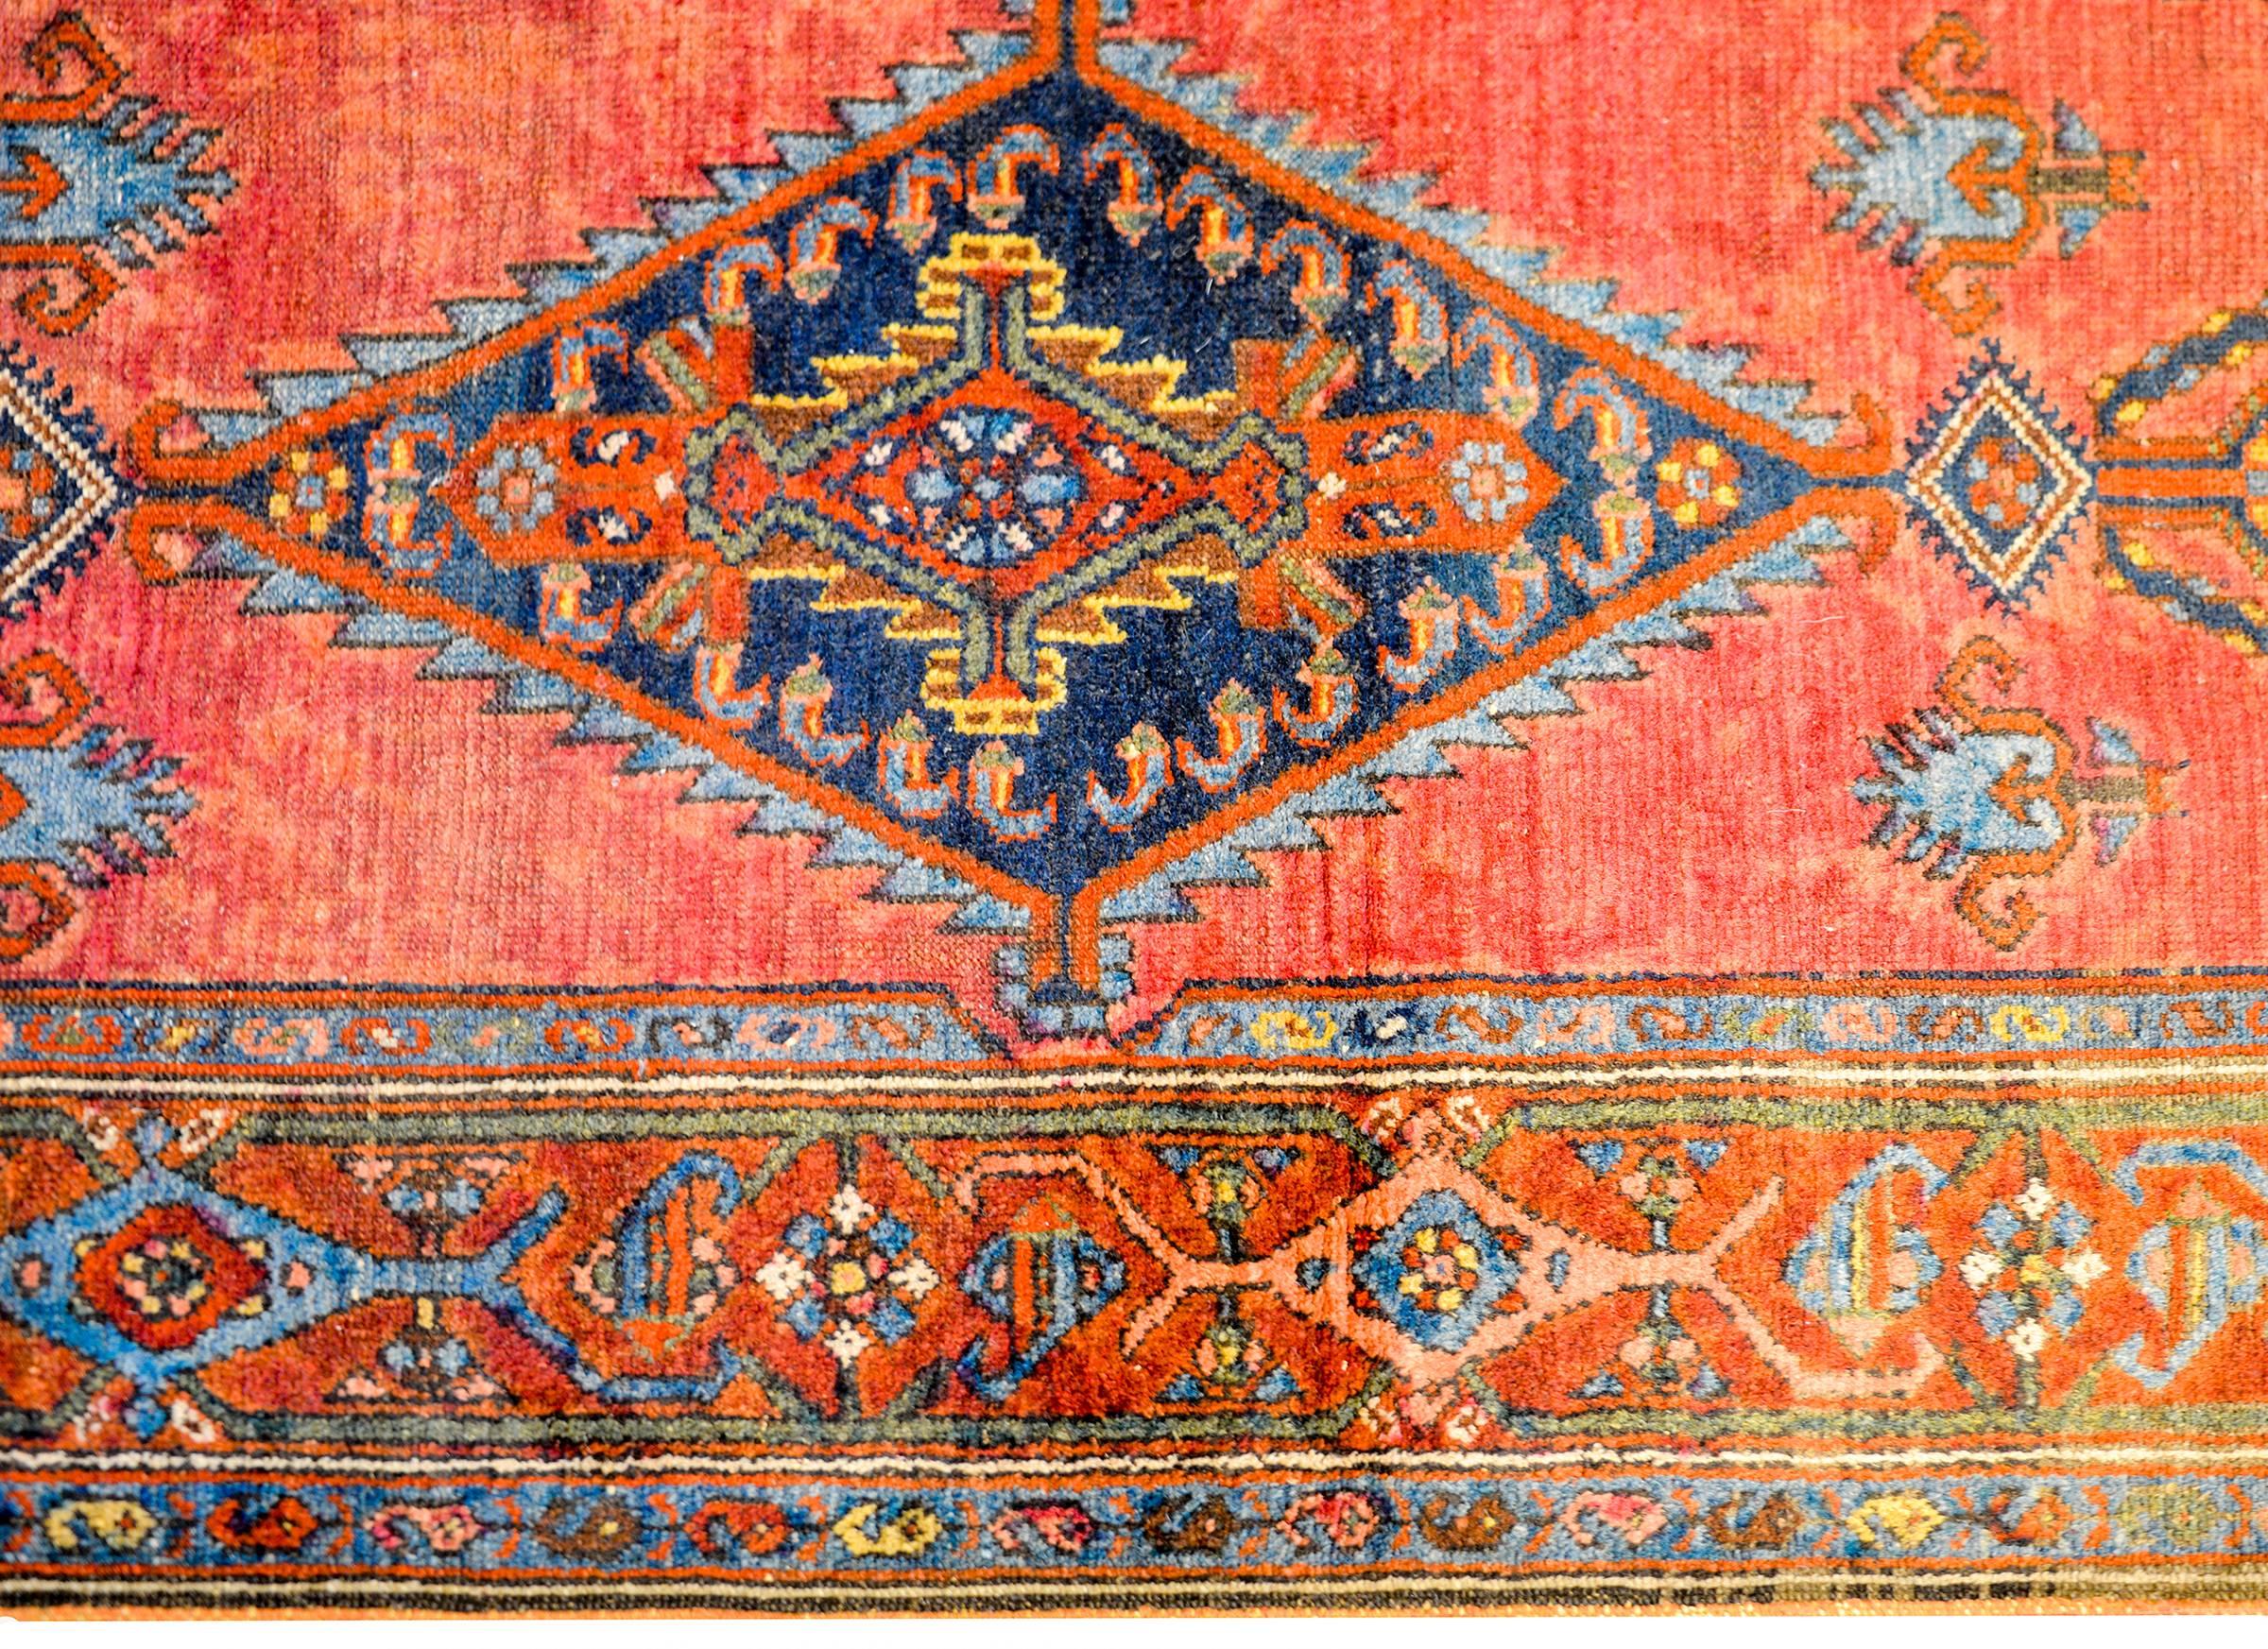 A gorgeous early 20th century Persian Malayar rug with a beautiful central diamond medallion on a brilliant crimson background. The border is wonderful, with a central stripe on stylized leaves and scrolling vines flanked by matching petite floral